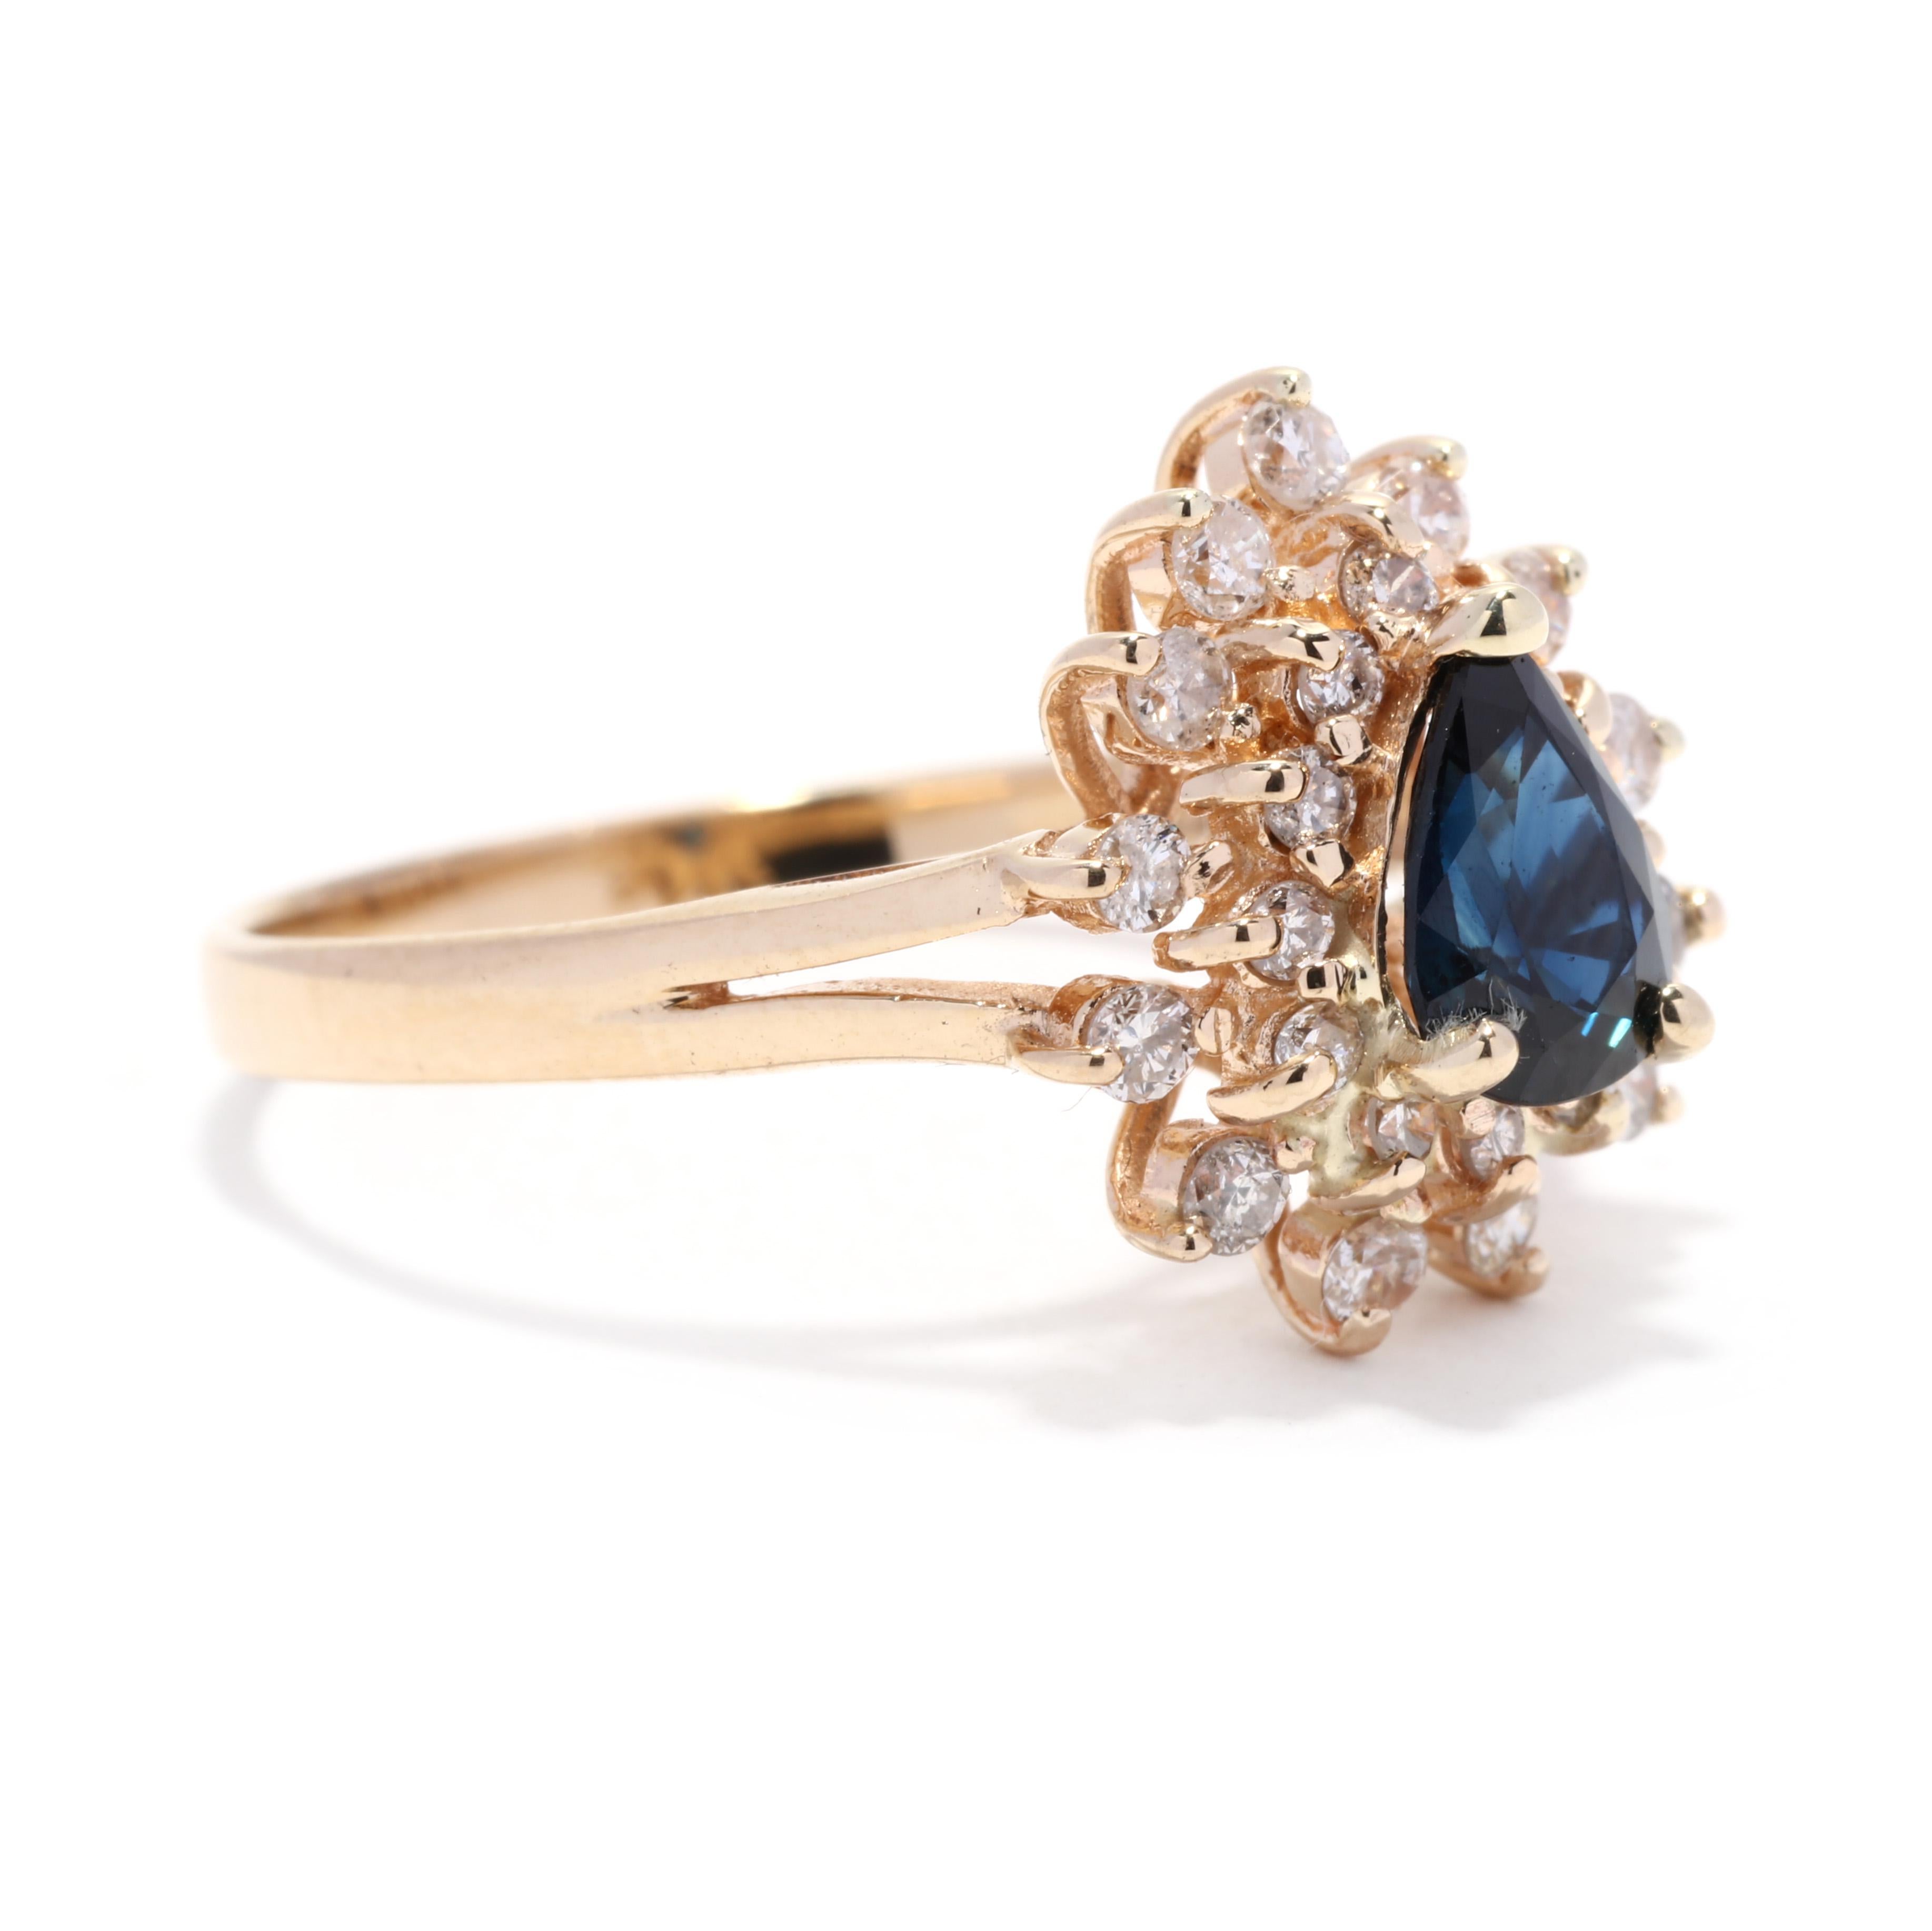 A vintage 14 karat yellow gold sapphire and diamond halo ring. This pear cut natural sapphire ring features a prong set, pear cut sapphire weighing approximately .85 carat surrounded by a double halo of round brilliant cut diamonds weighing